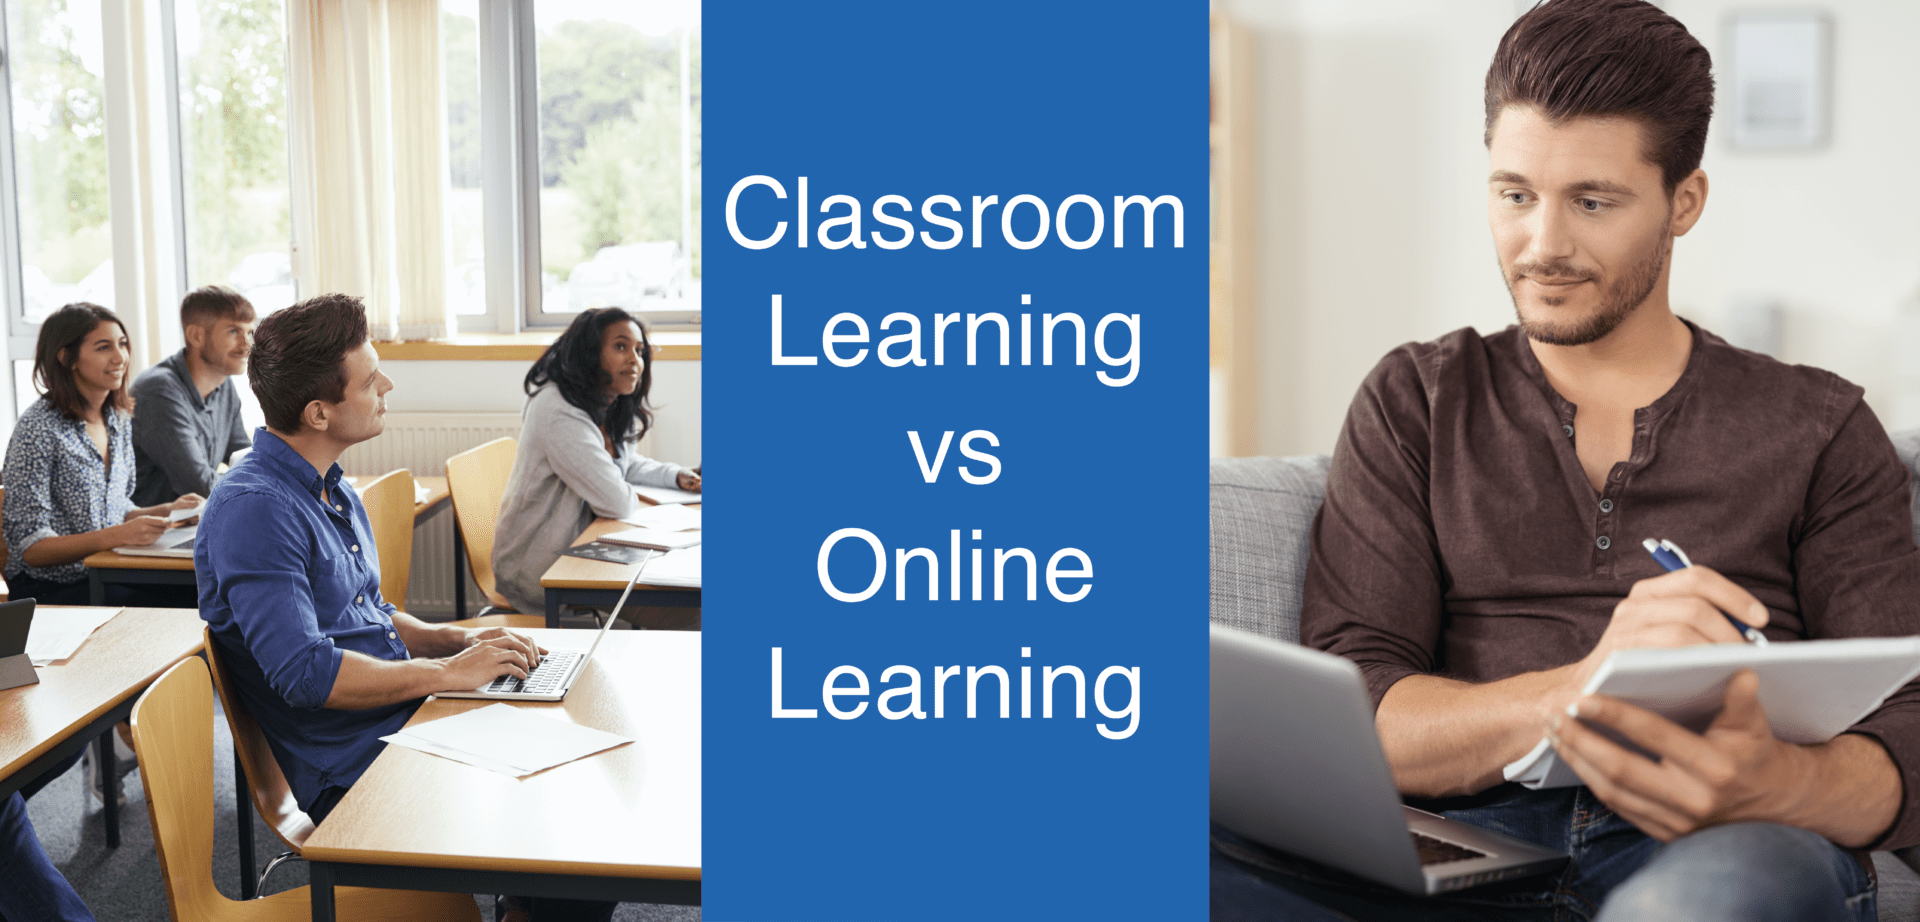 Classroom Learning vs Online Learning - which one do you choose?